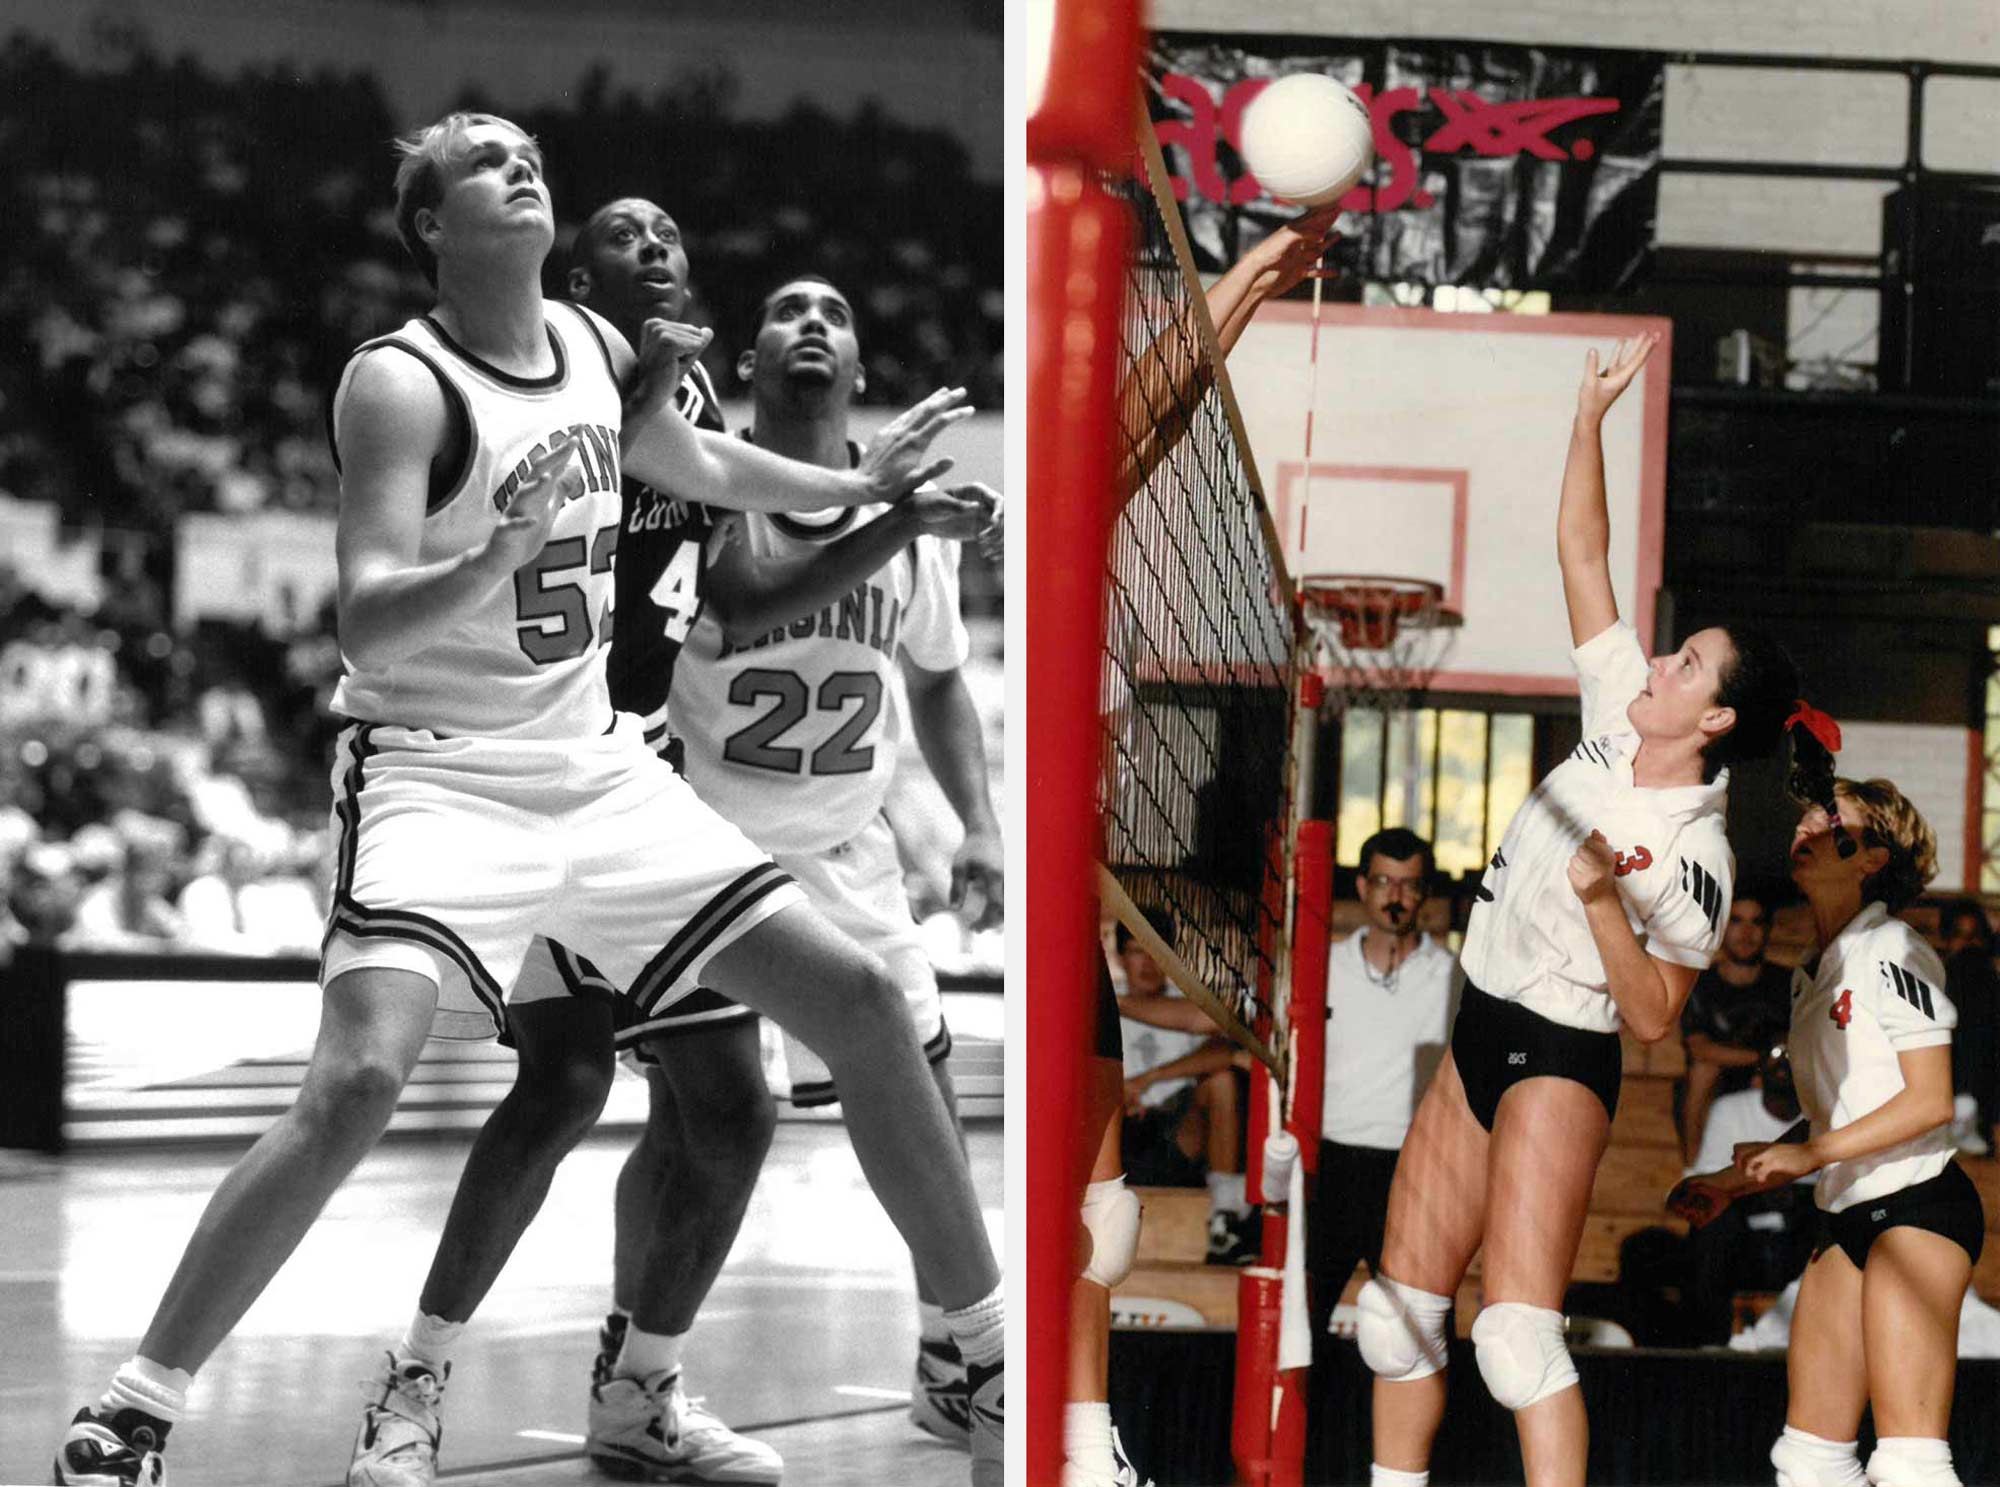 Left: Shawn Wilson playing basketball.  Right: Kerry Wilson playing volleyball during a game